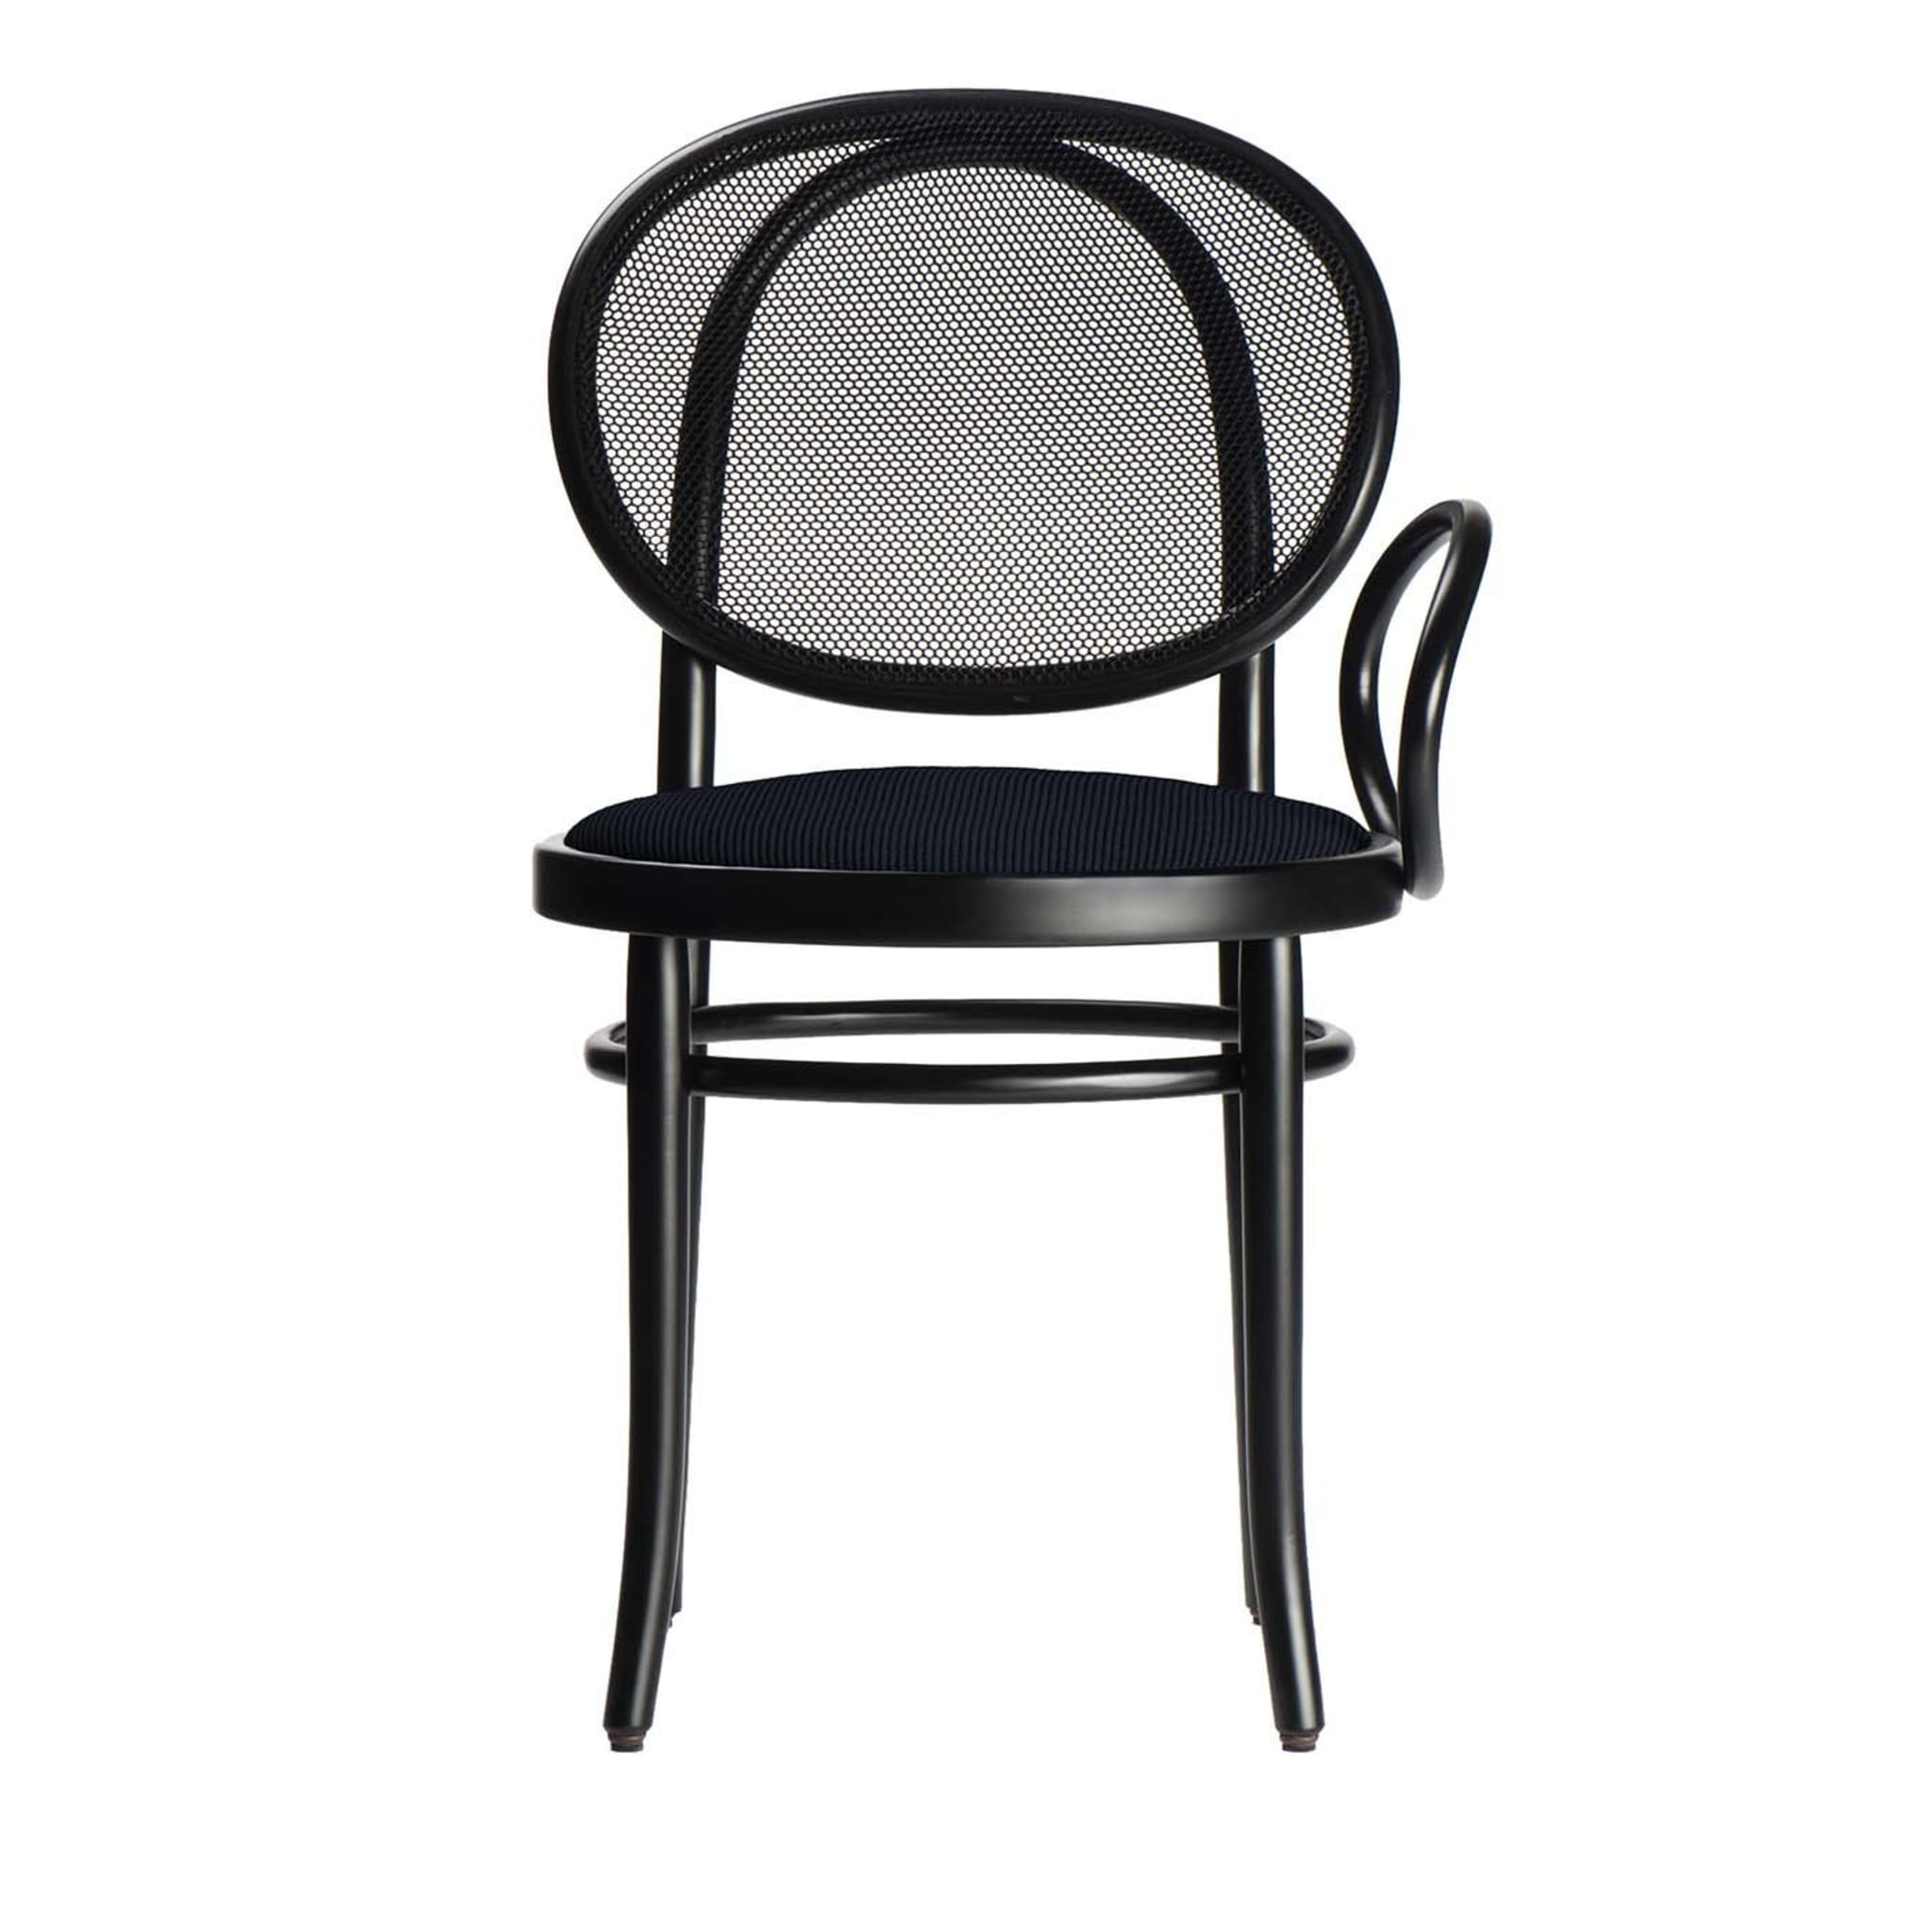 No. 0 Black Chair by Front - Main view